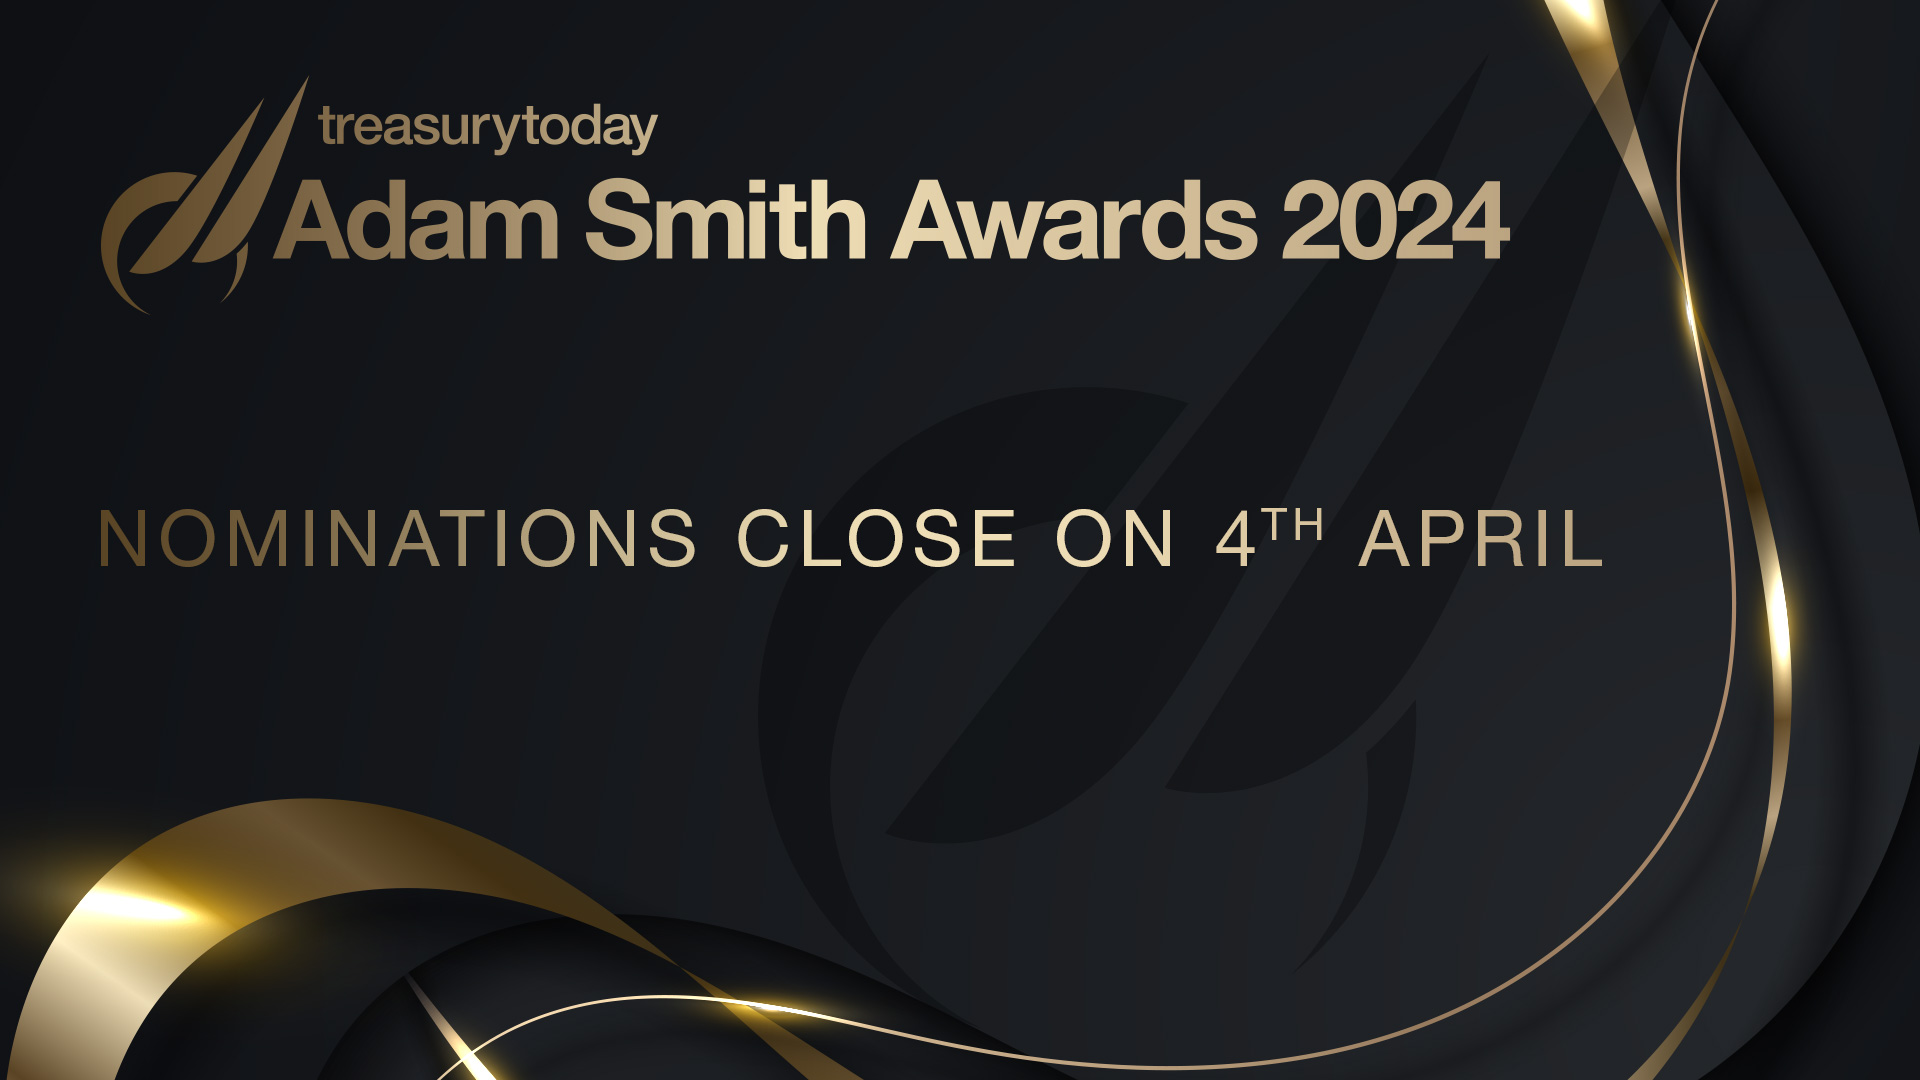 Adam Smith Awards 2024 nominations close on 4th April